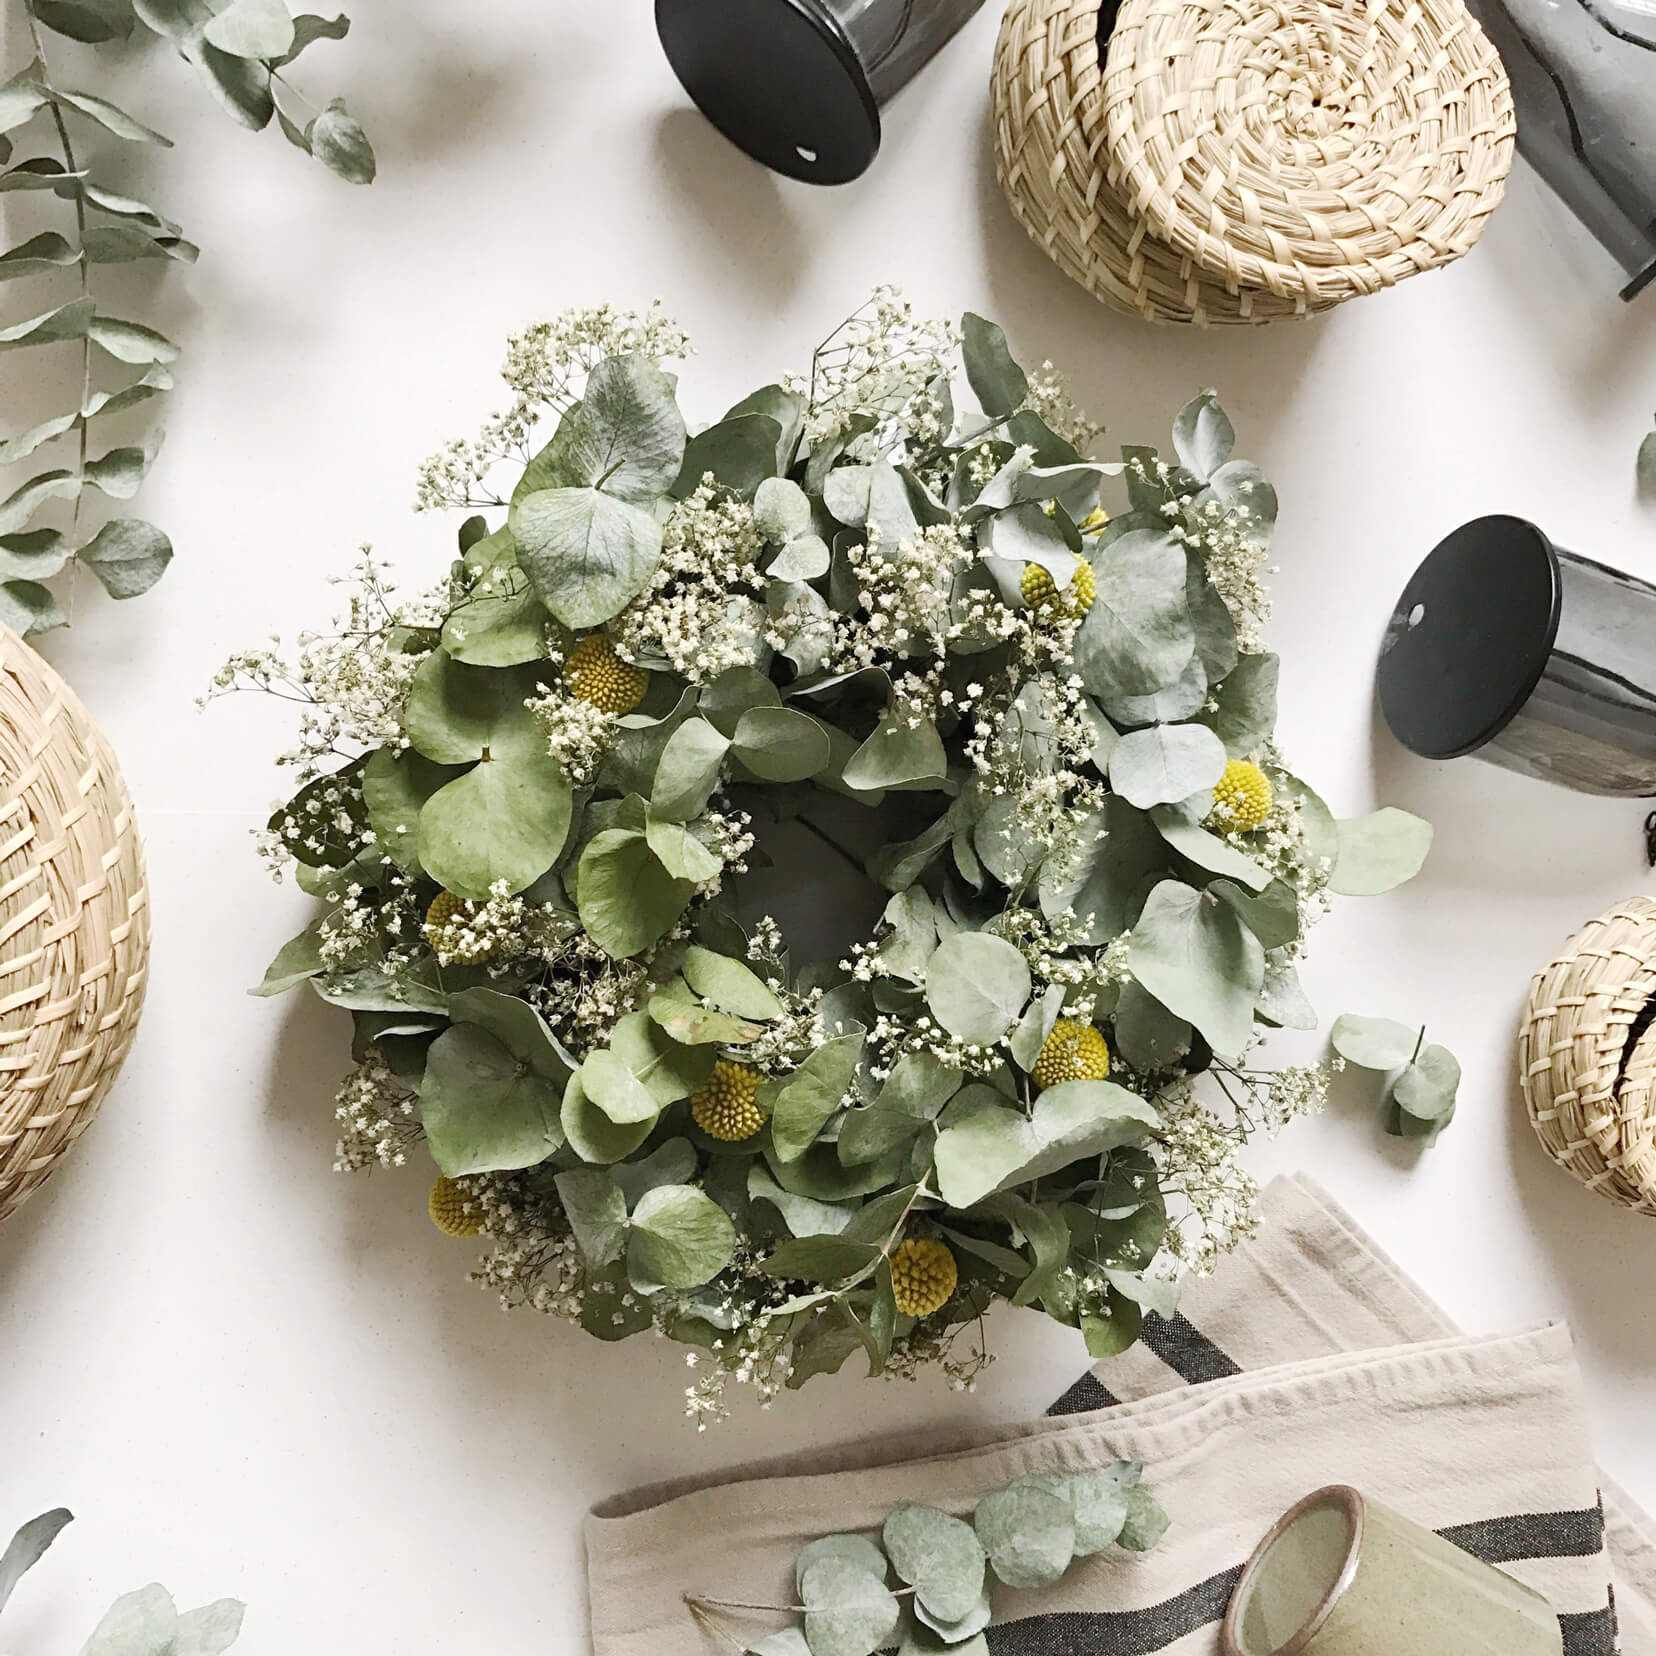 Wreath on a table with leaves and props next to it